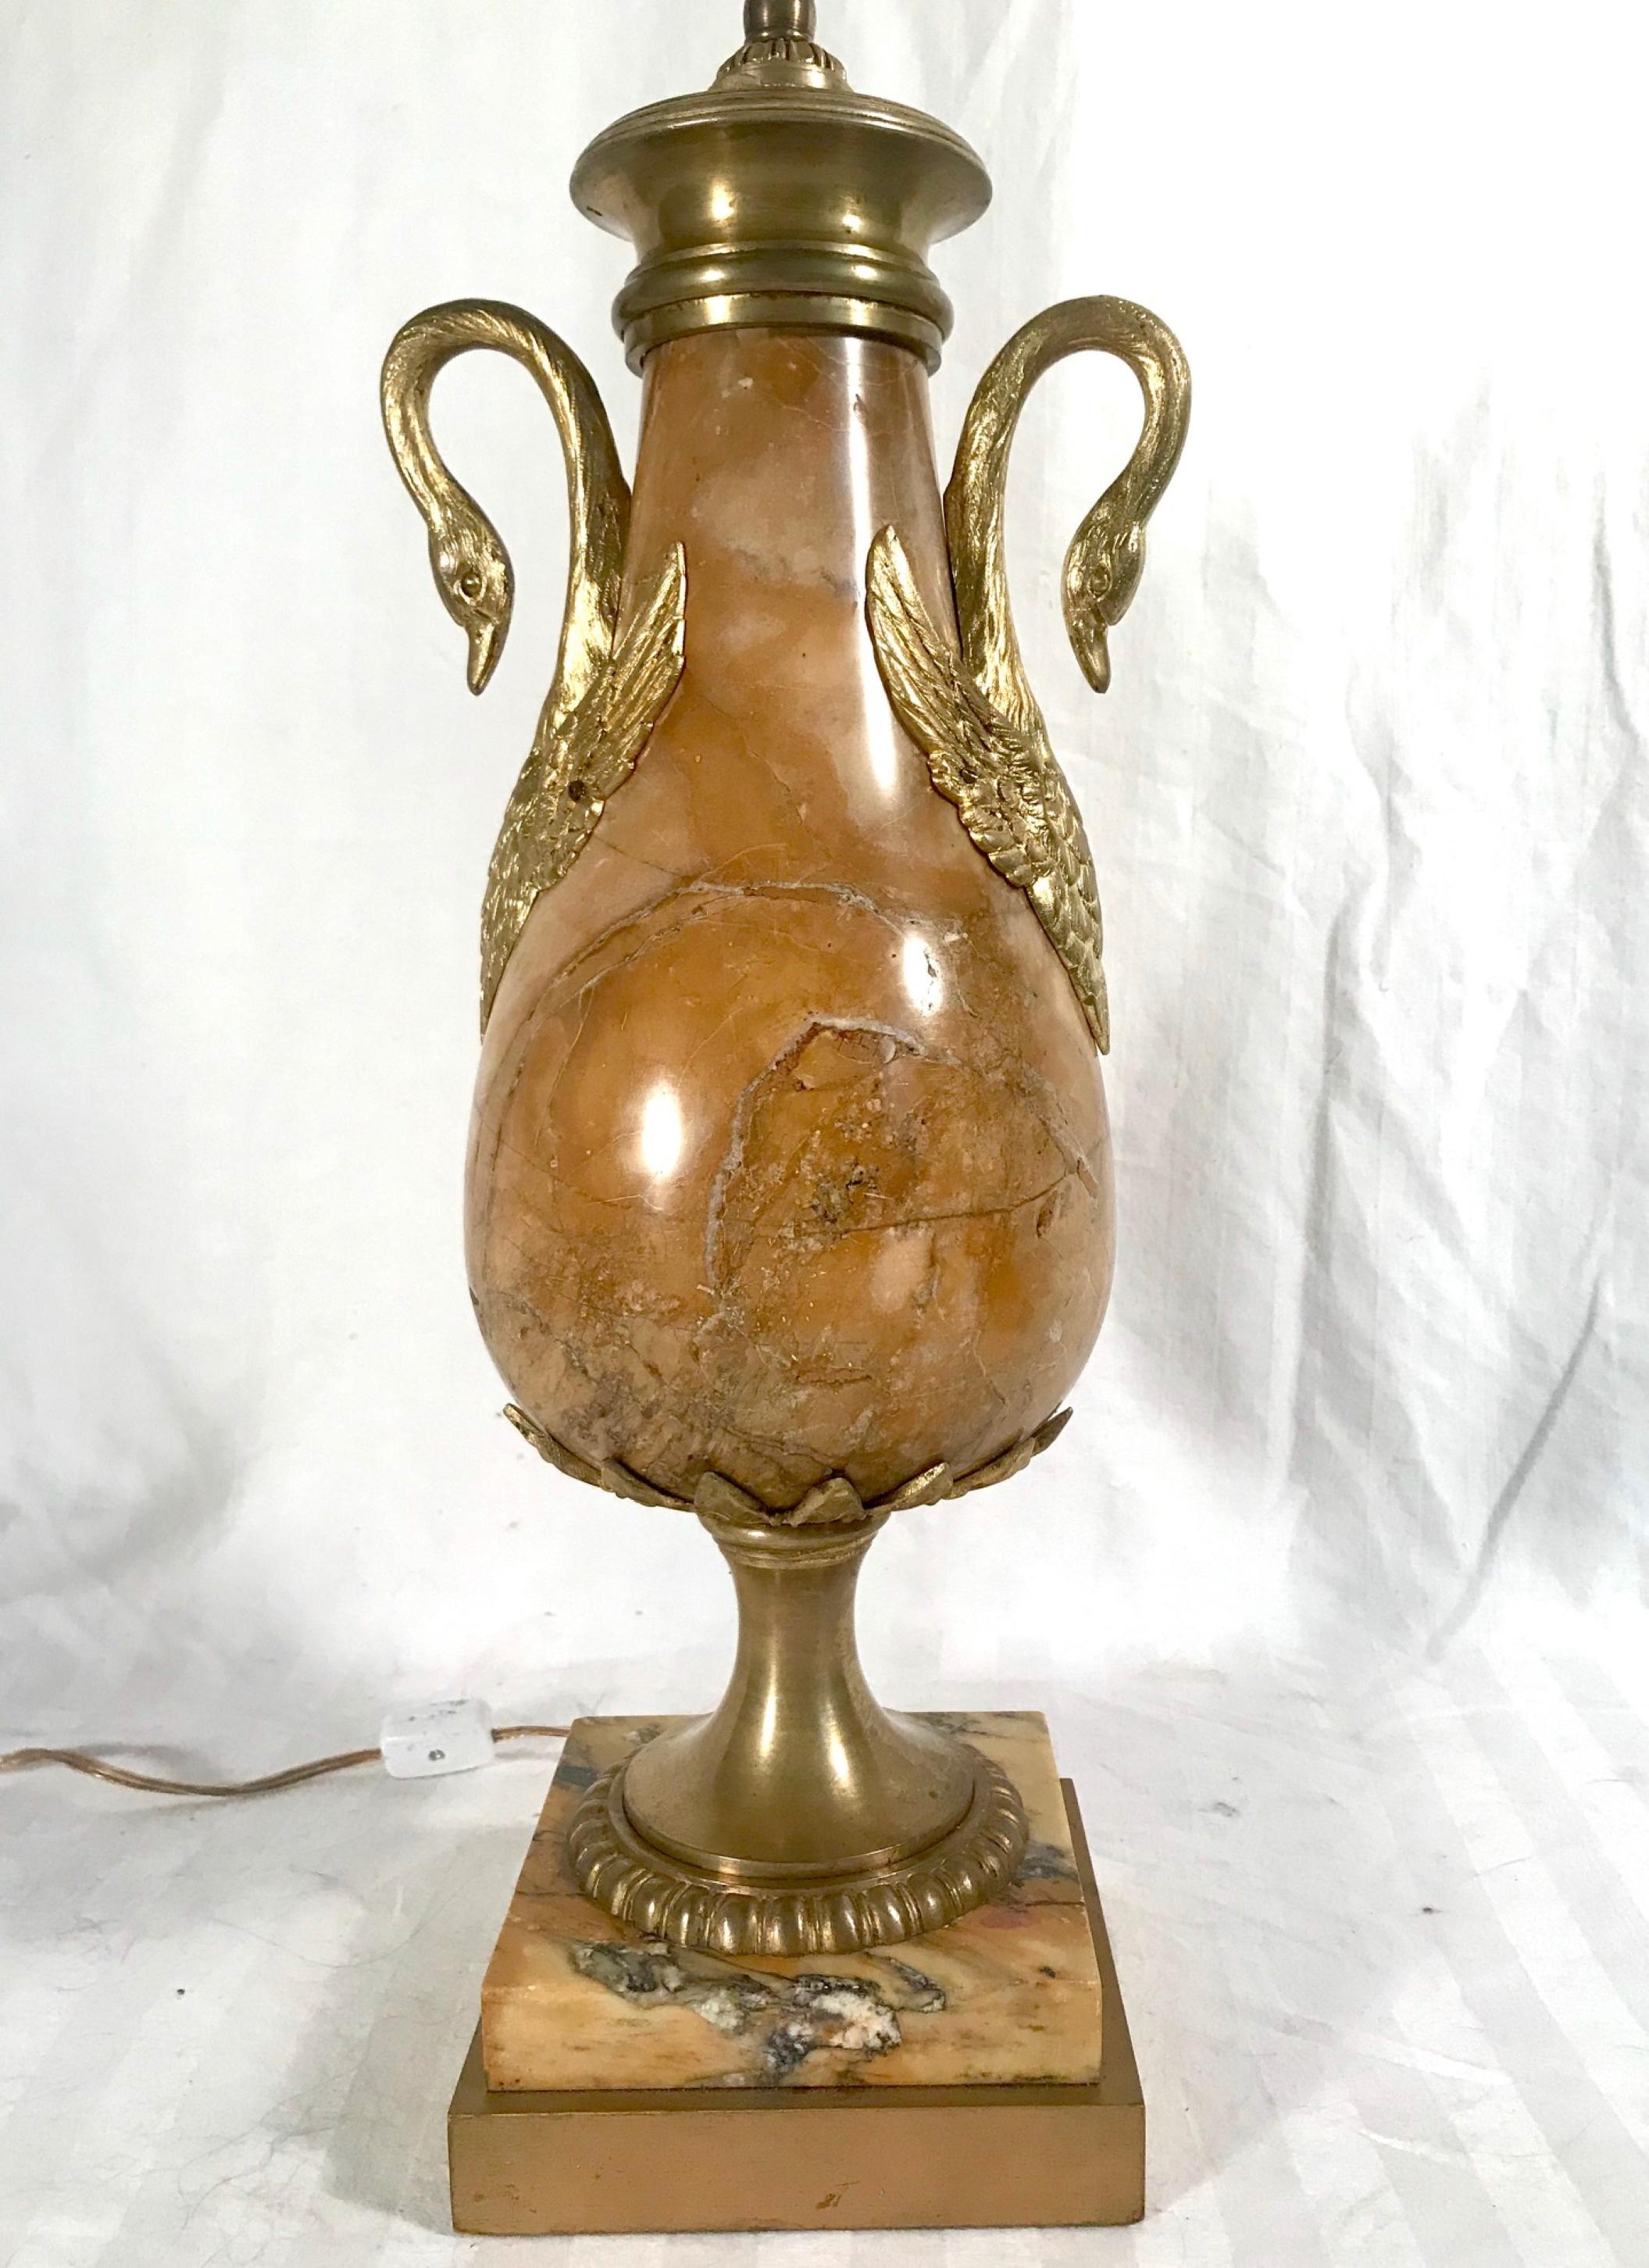 Antique French Louis XVI style sienna marble and ormolu urn

Elegant 19th century sienna marble and ormolu urn converted as a table lamp. The baluster shaped urn is decorated with graceful swan ormolu handles. The urn lamp is supported on a bronze